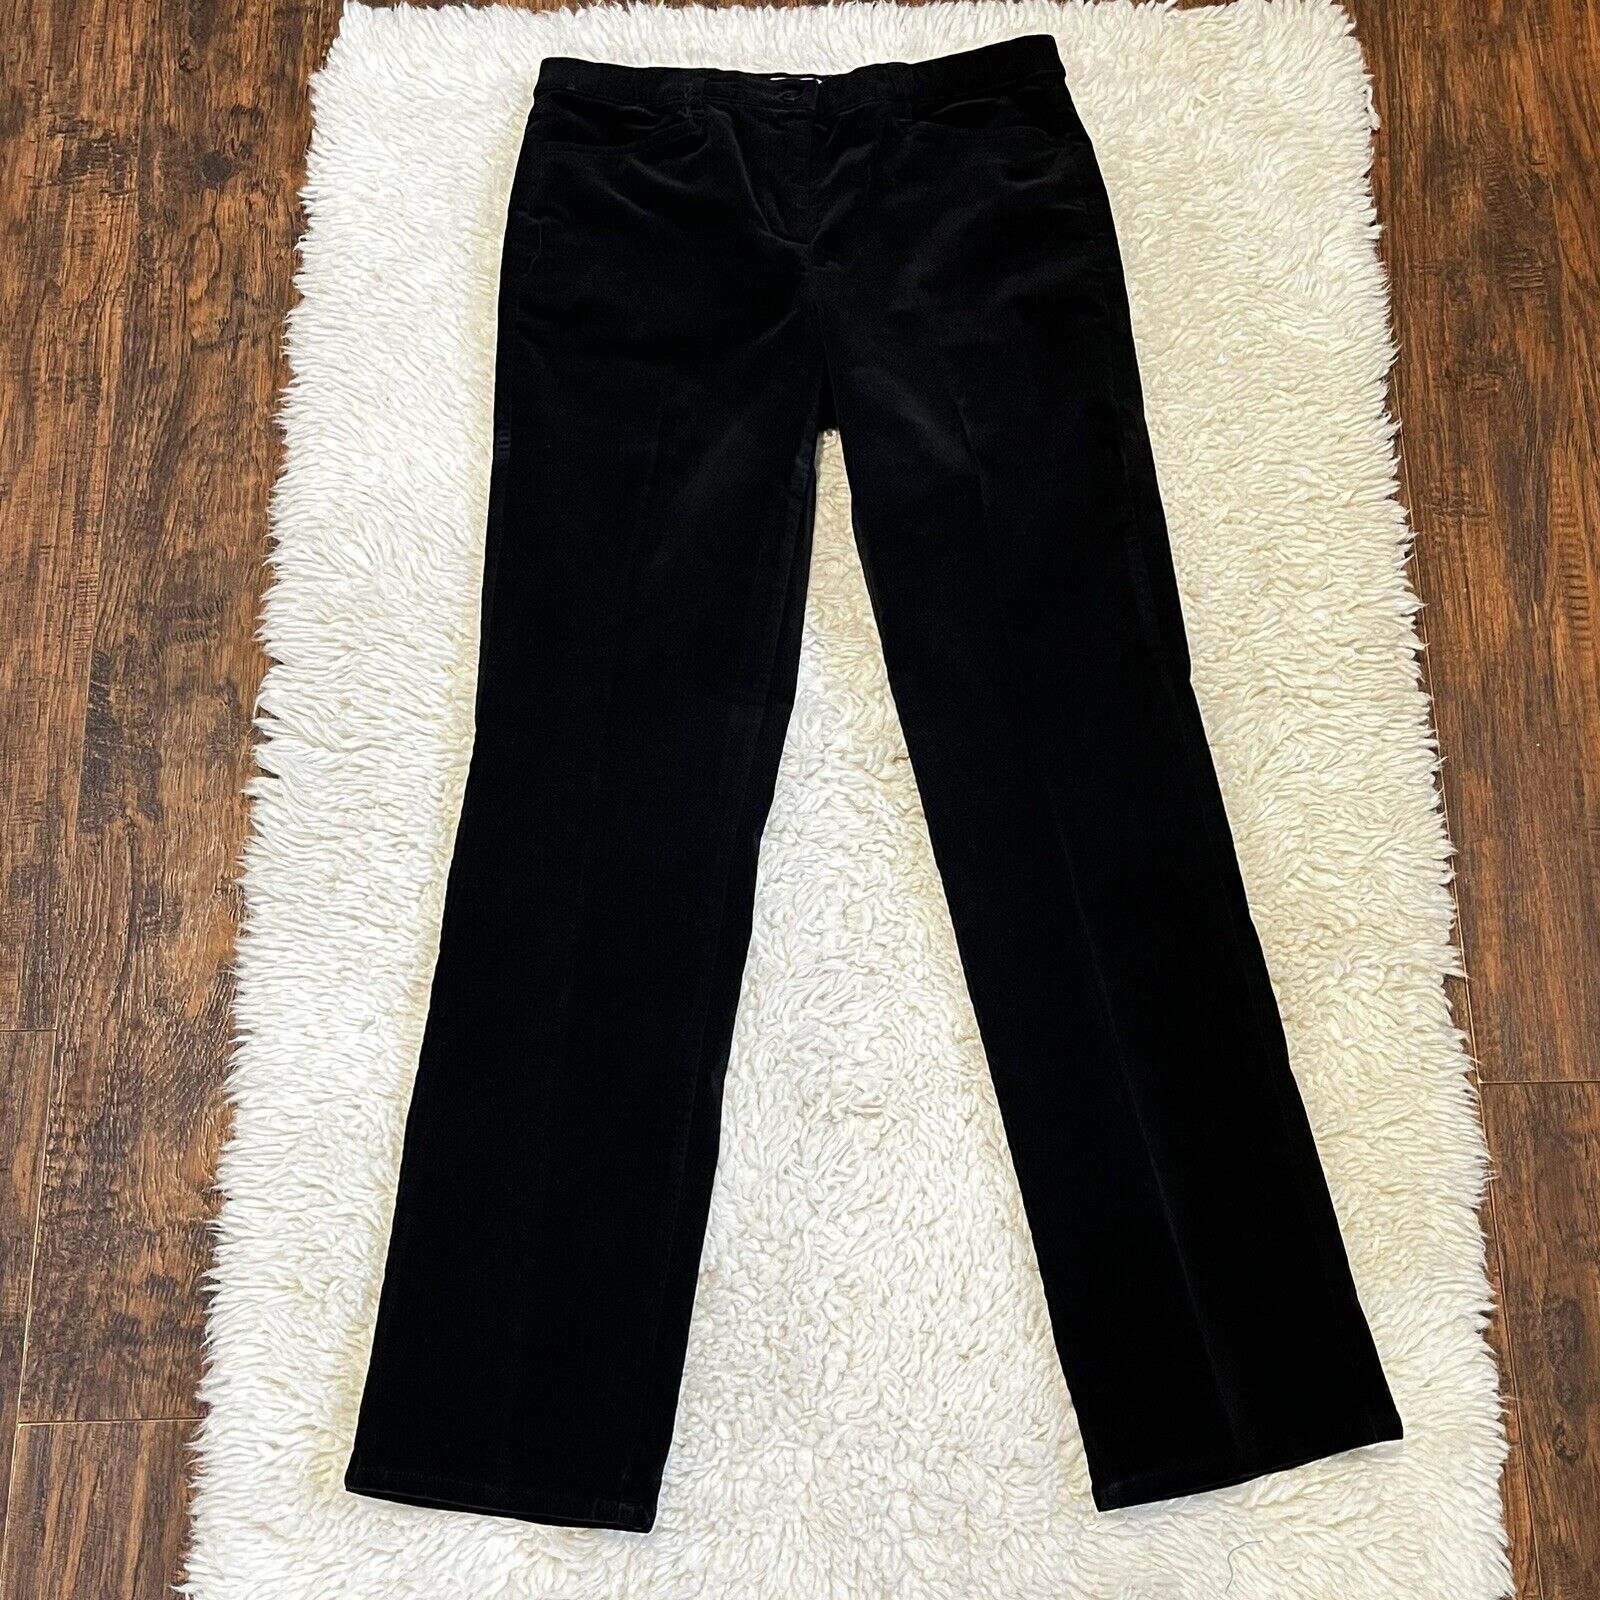 Orvis Corduroy Pants Womens Size 8 Black Stretch Pleated Trousers Pockets